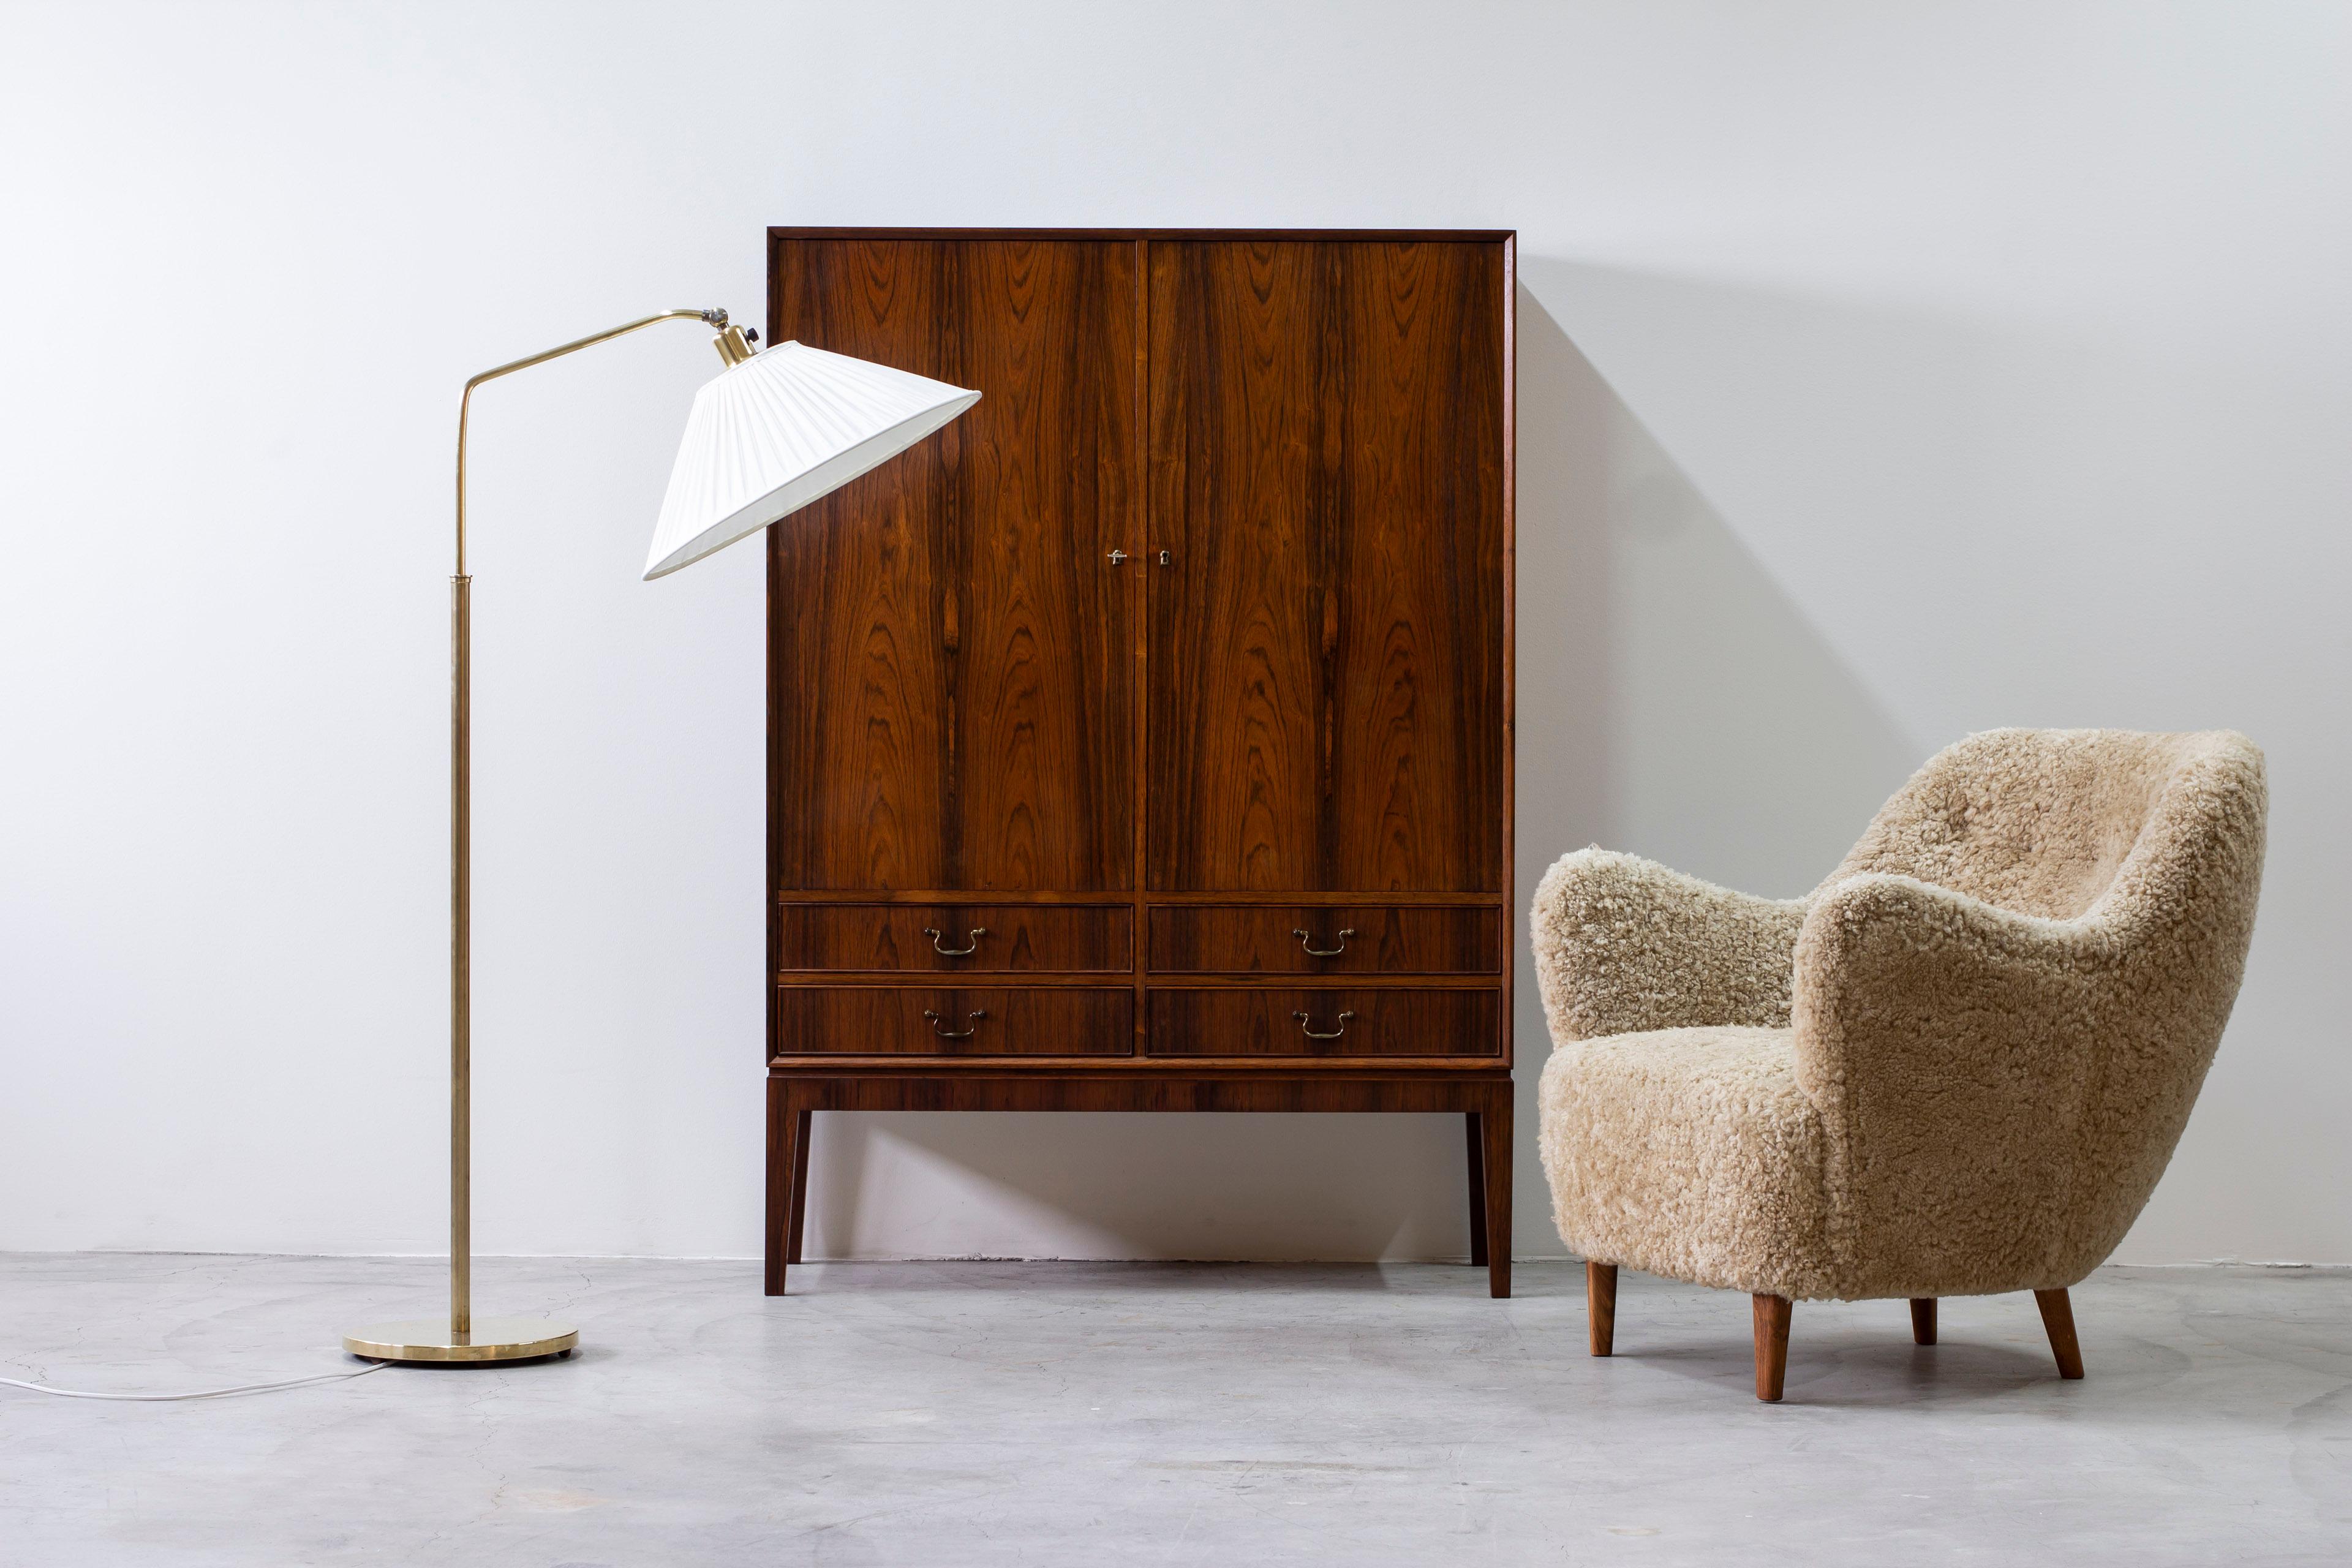 Brass and fabric floor lamps by Harald Elof Notini, Böhlmarks, 1940s For Sale 4